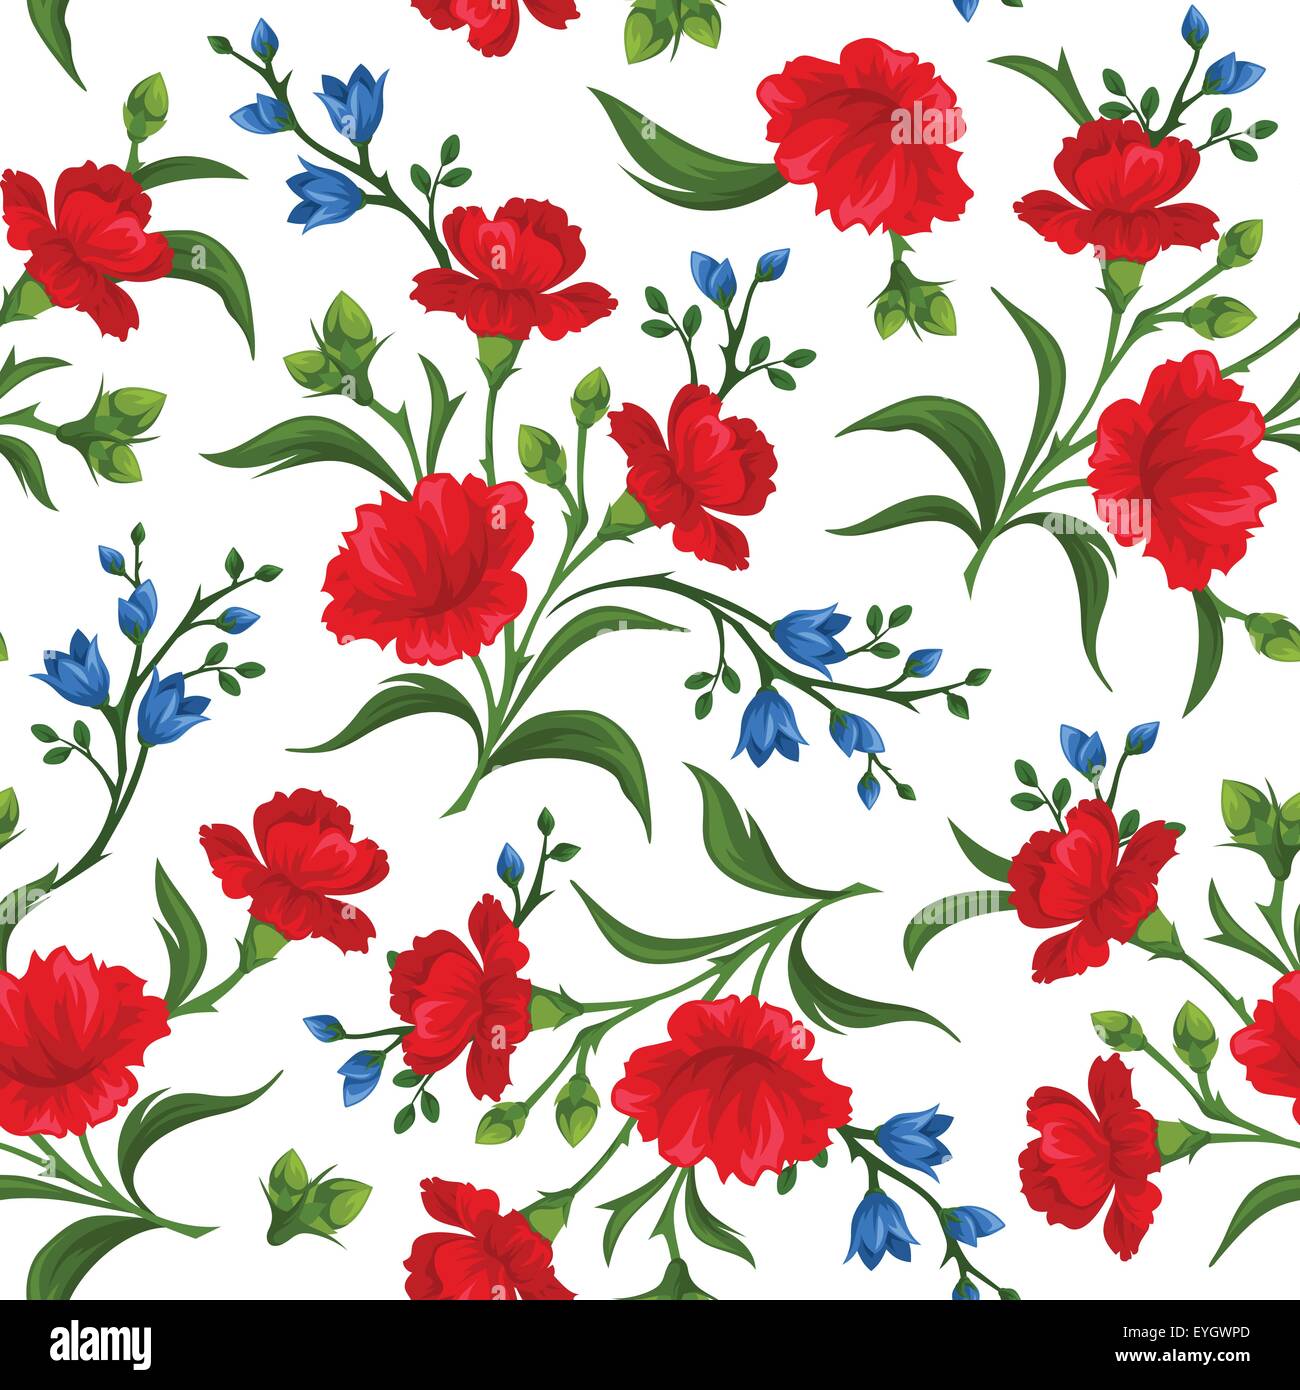 Seamless pattern with red and blue flowers. Vector illustration. Stock Vector